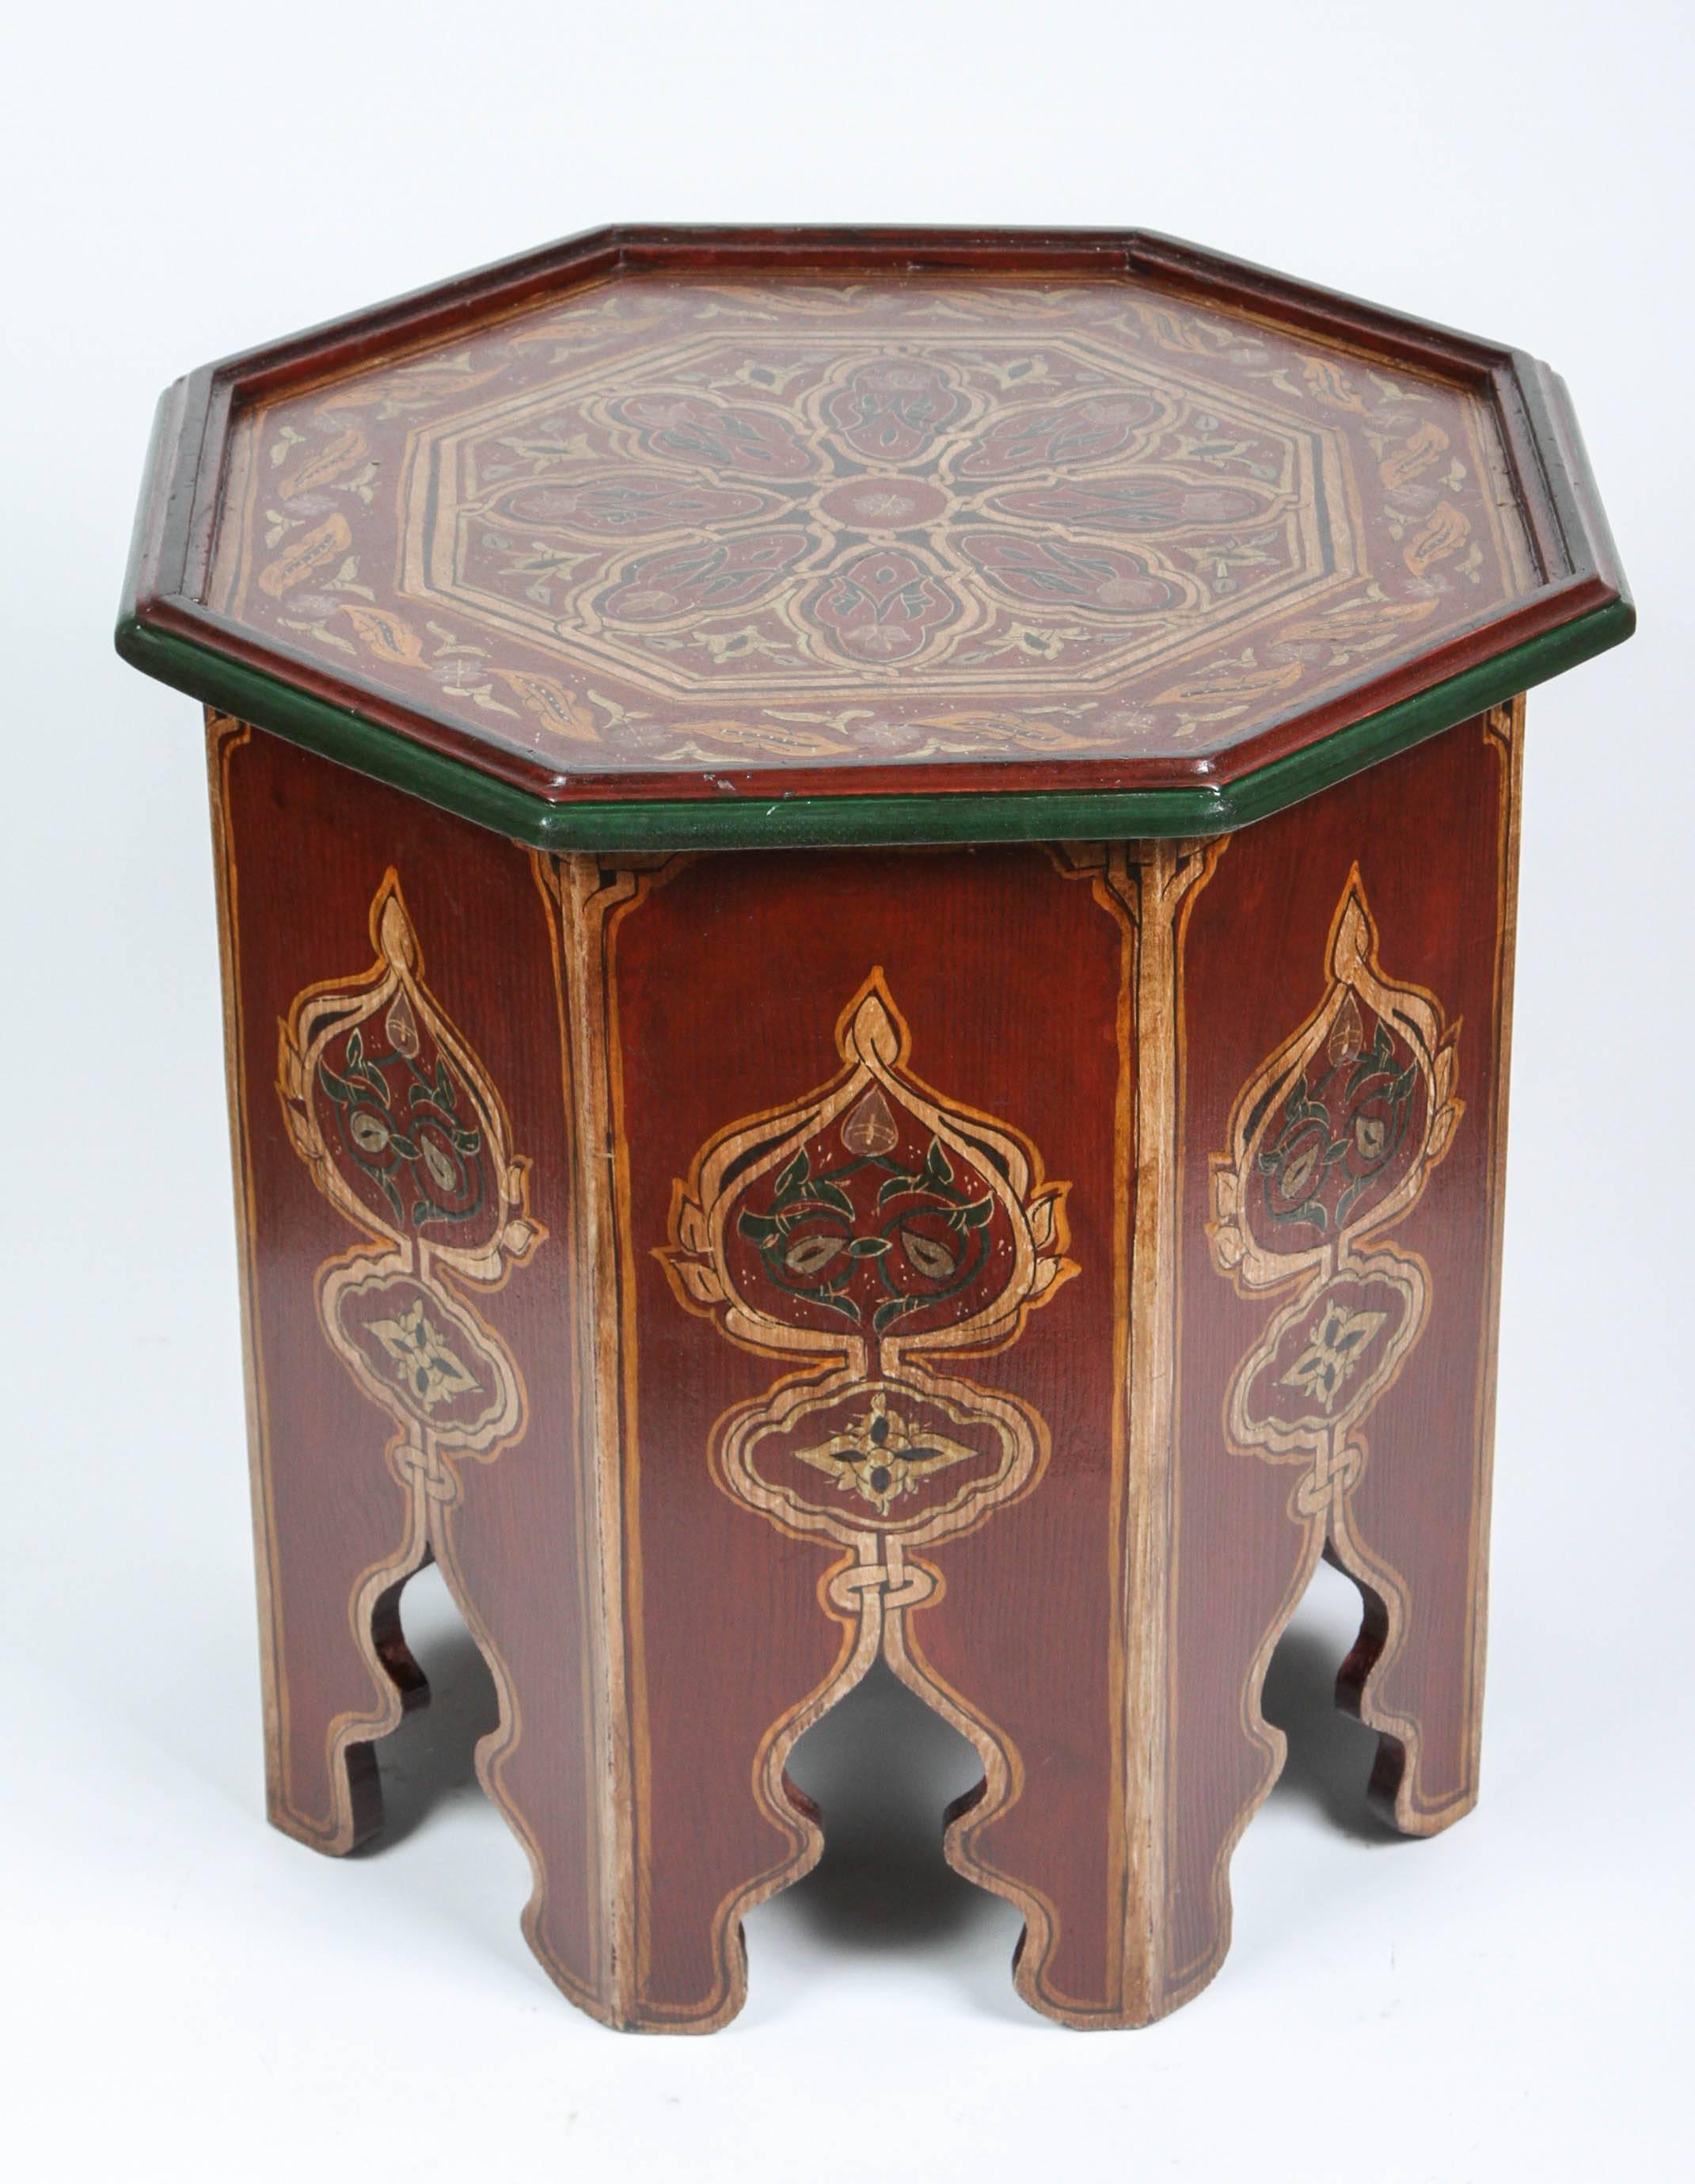 Pair of Moroccan hand-painted side tables with Moorish designs. Maroon background with multicolored floral and geometric designs. 
Very fine Moorish artwork on an octagonal shape base with hand cut Moorish arches on each sides.
You can use them as